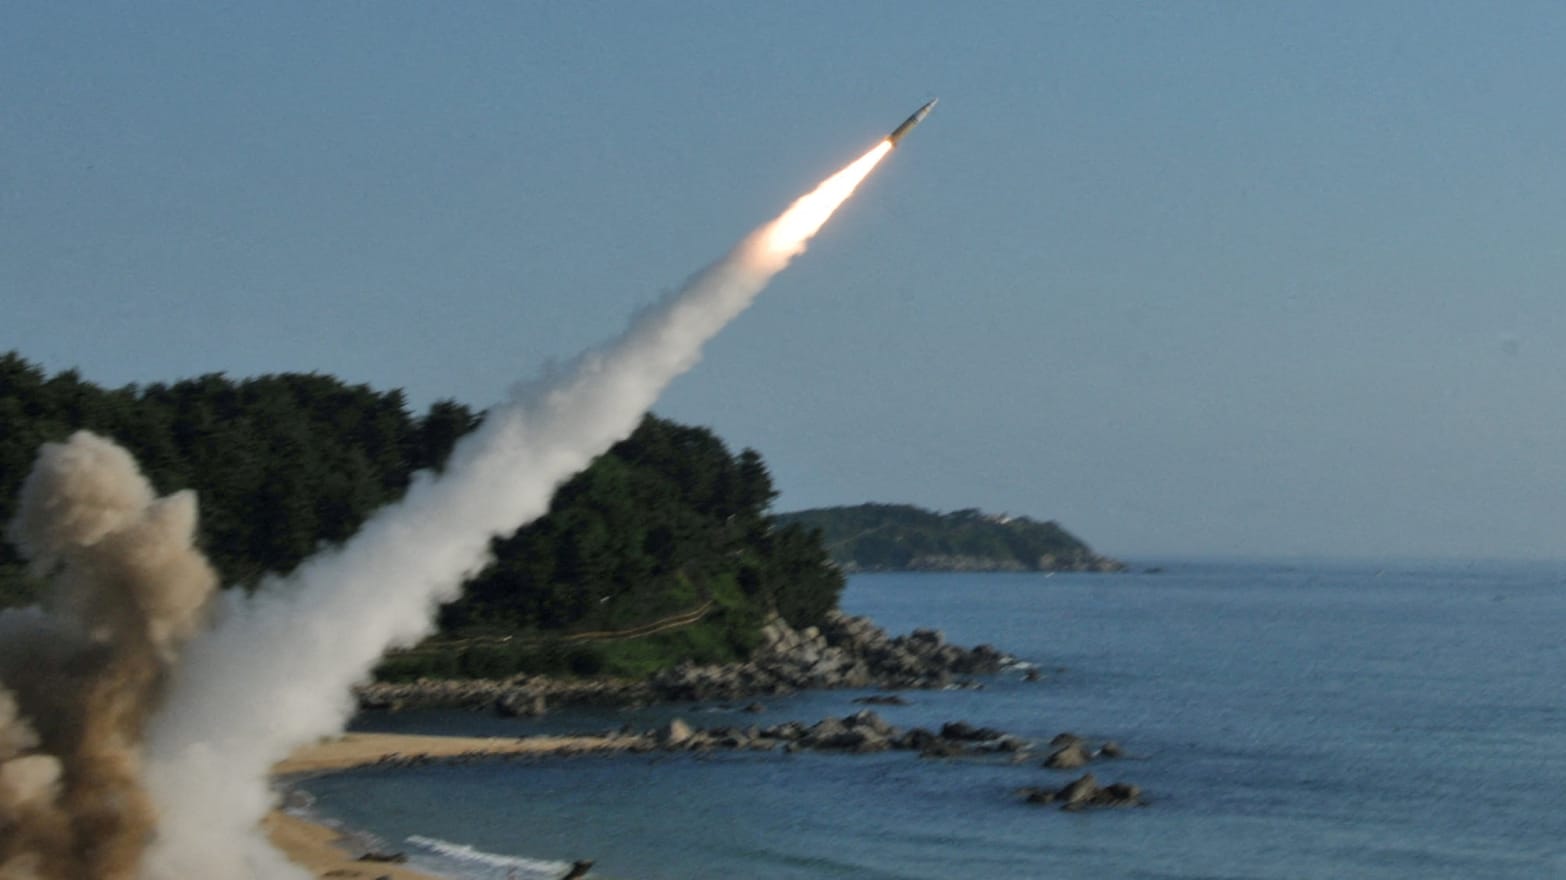 A missile launching over a shoreline.